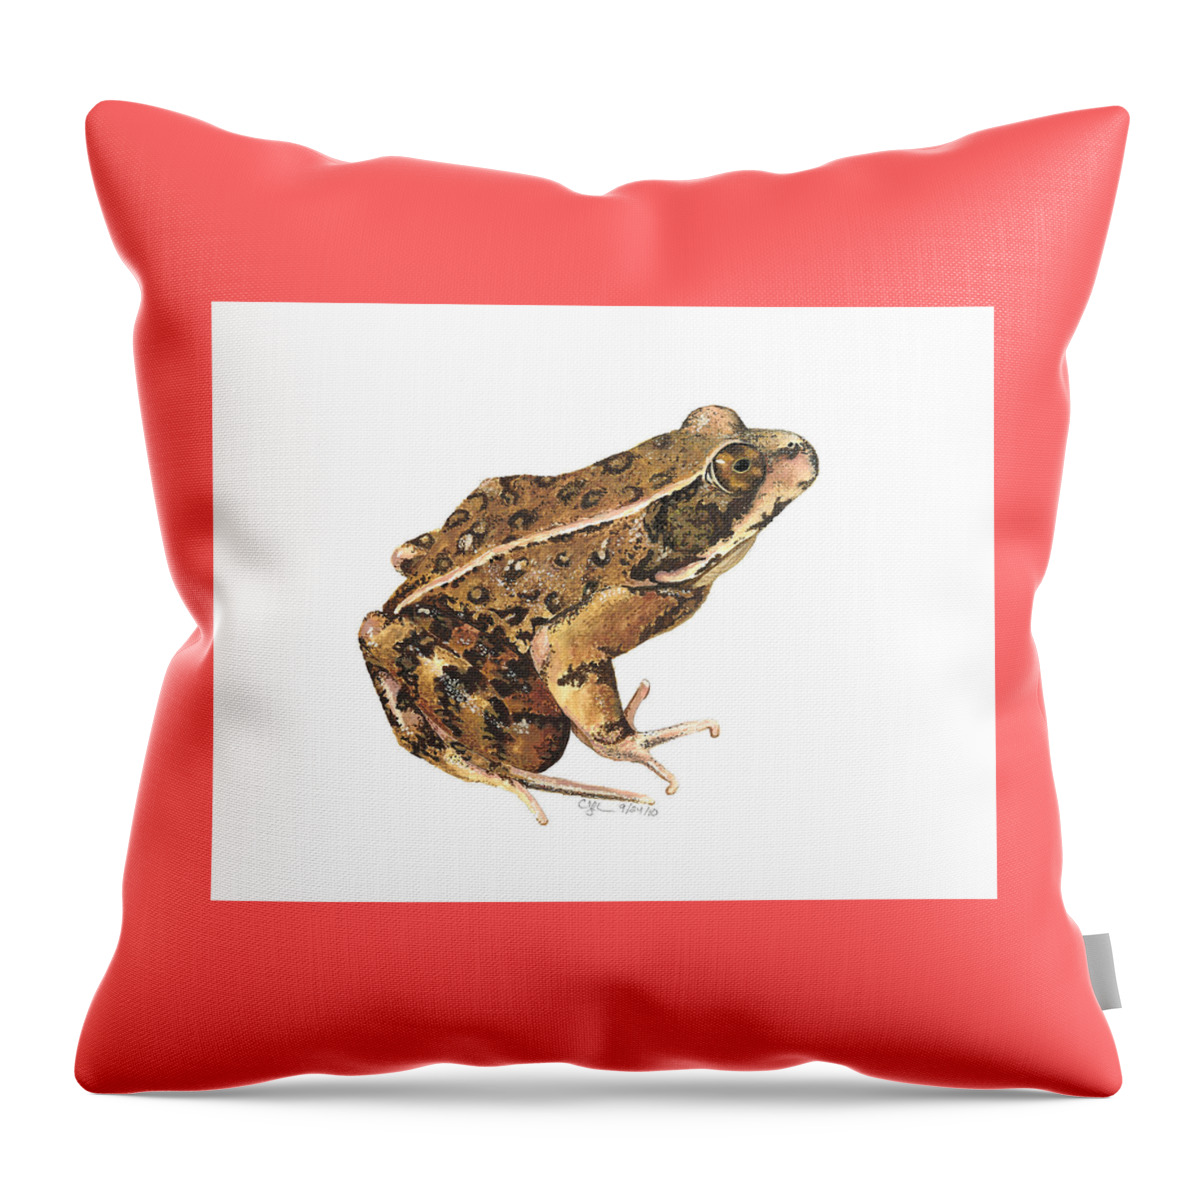 California Throw Pillow featuring the painting California Red-legged Frog by Cindy Hitchcock